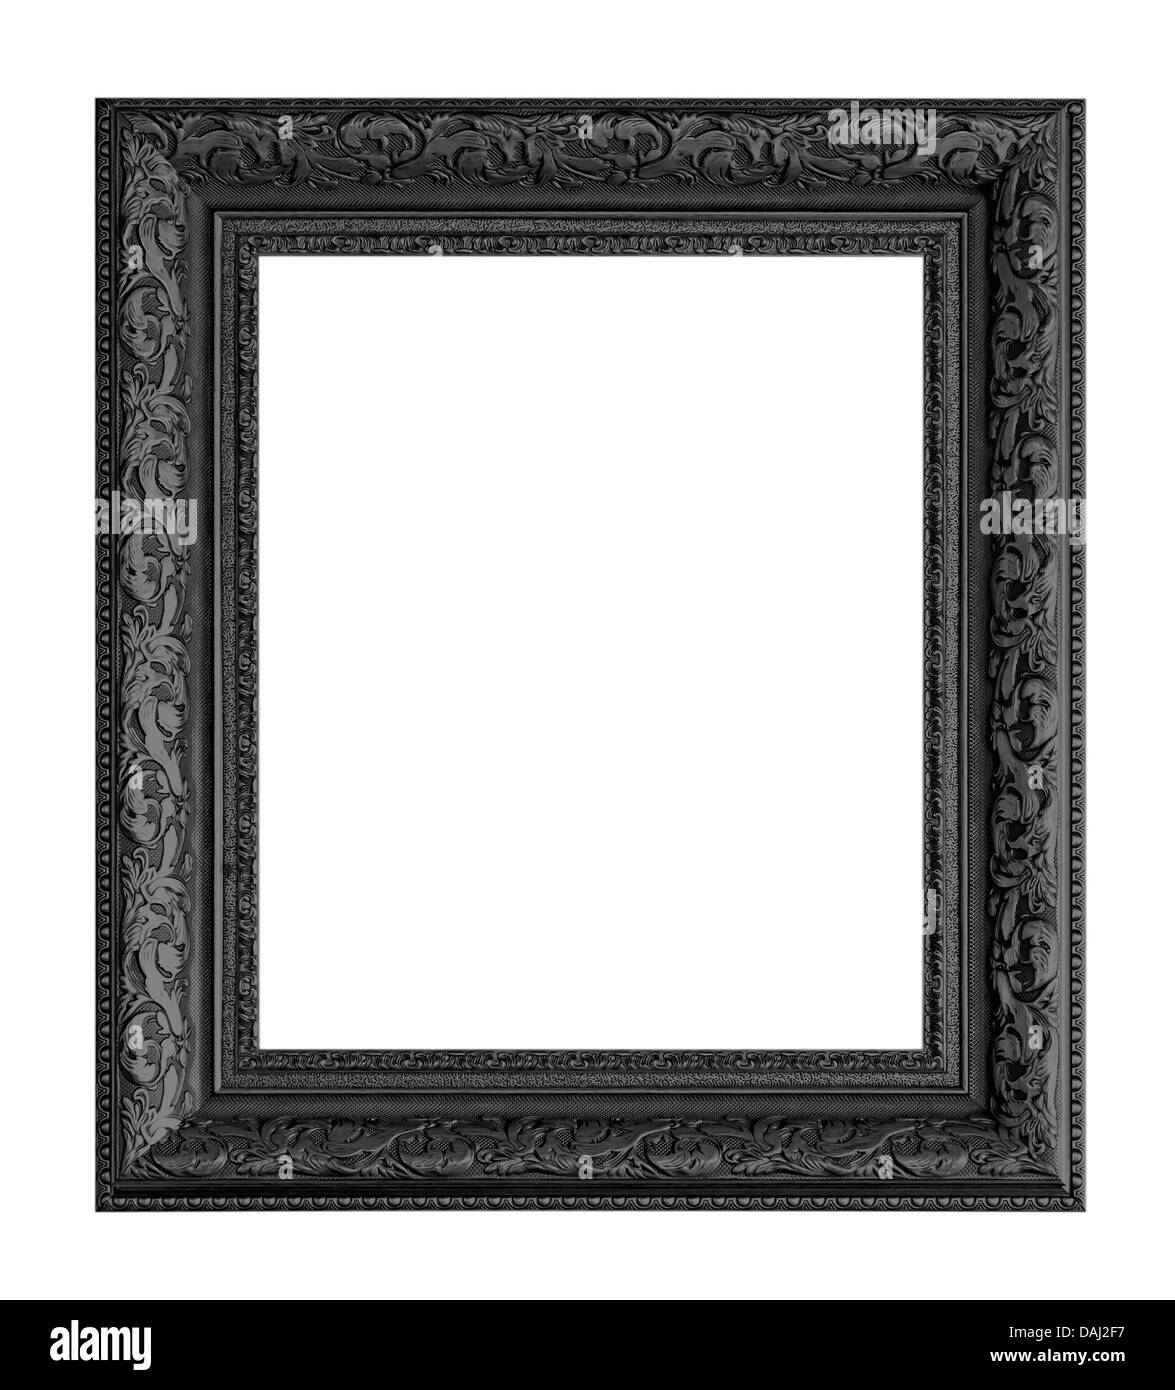 Old Antique Gold frame Isolated White Background Decorative Carved Wood Stand Antique Black Frame Isolated on White Background Stock Photo